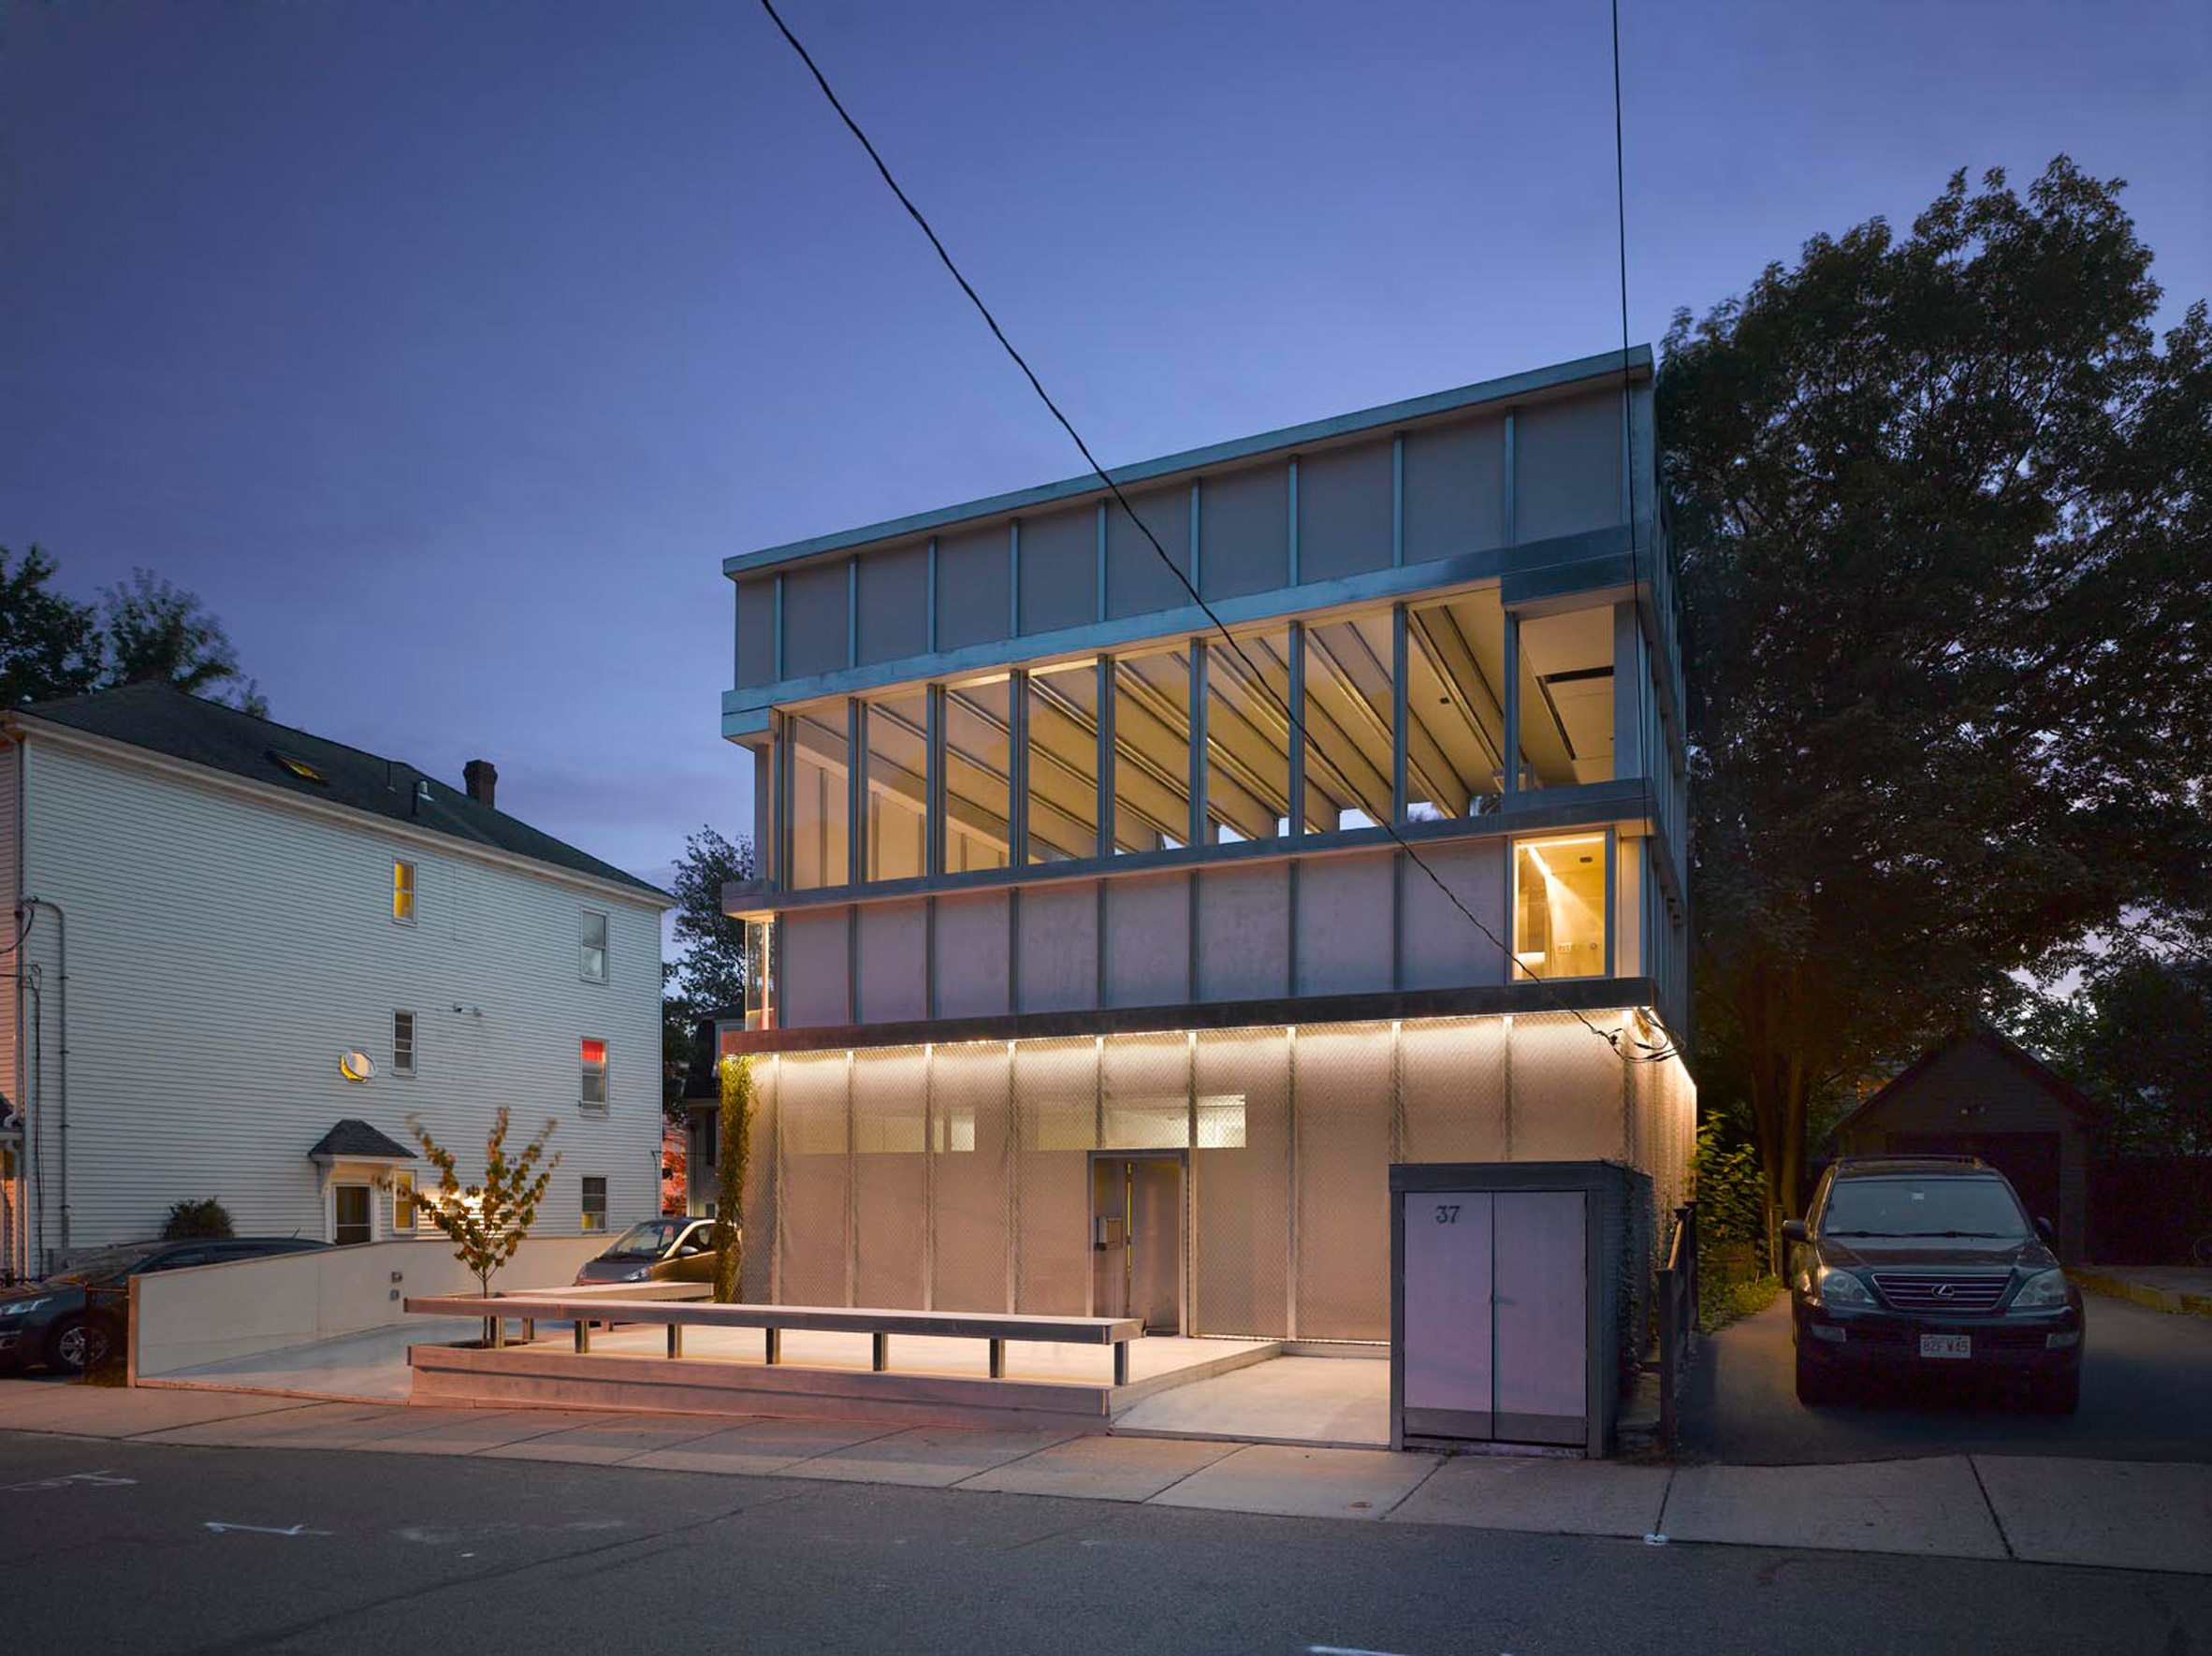 Parking garage extension forms home for architects Ensamble-24